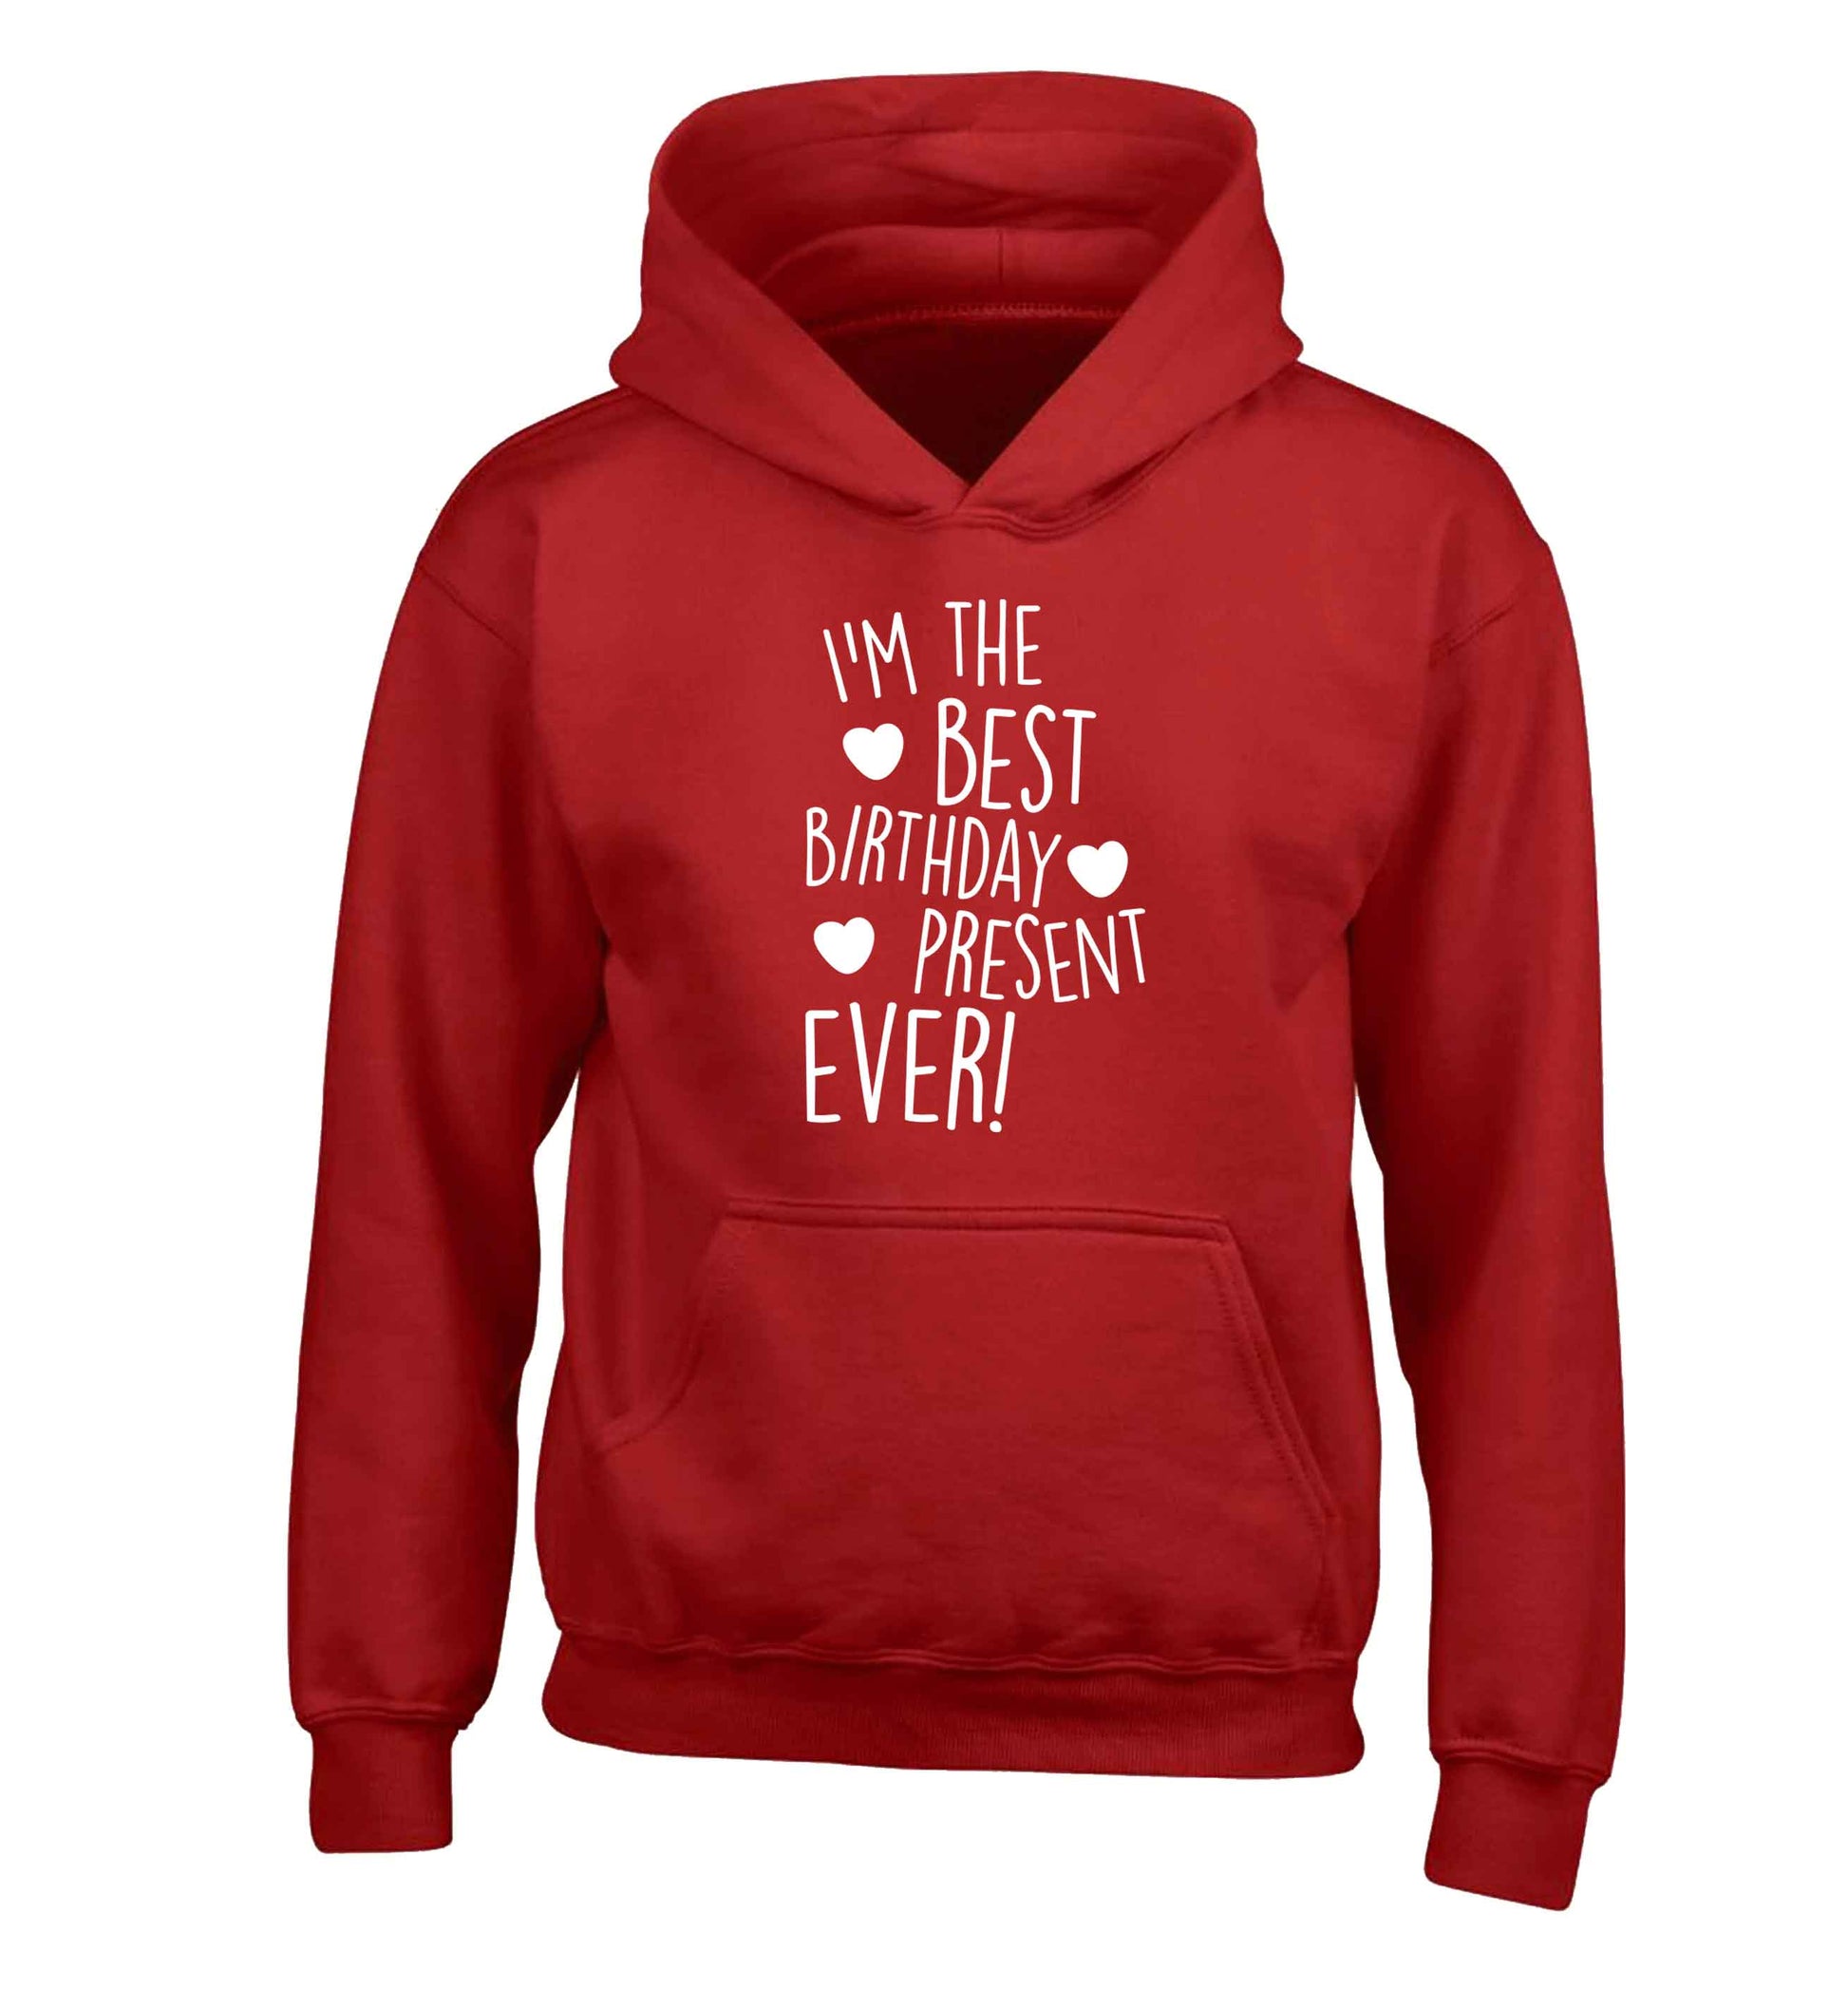 I'm the best birthday present ever children's red hoodie 12-13 Years